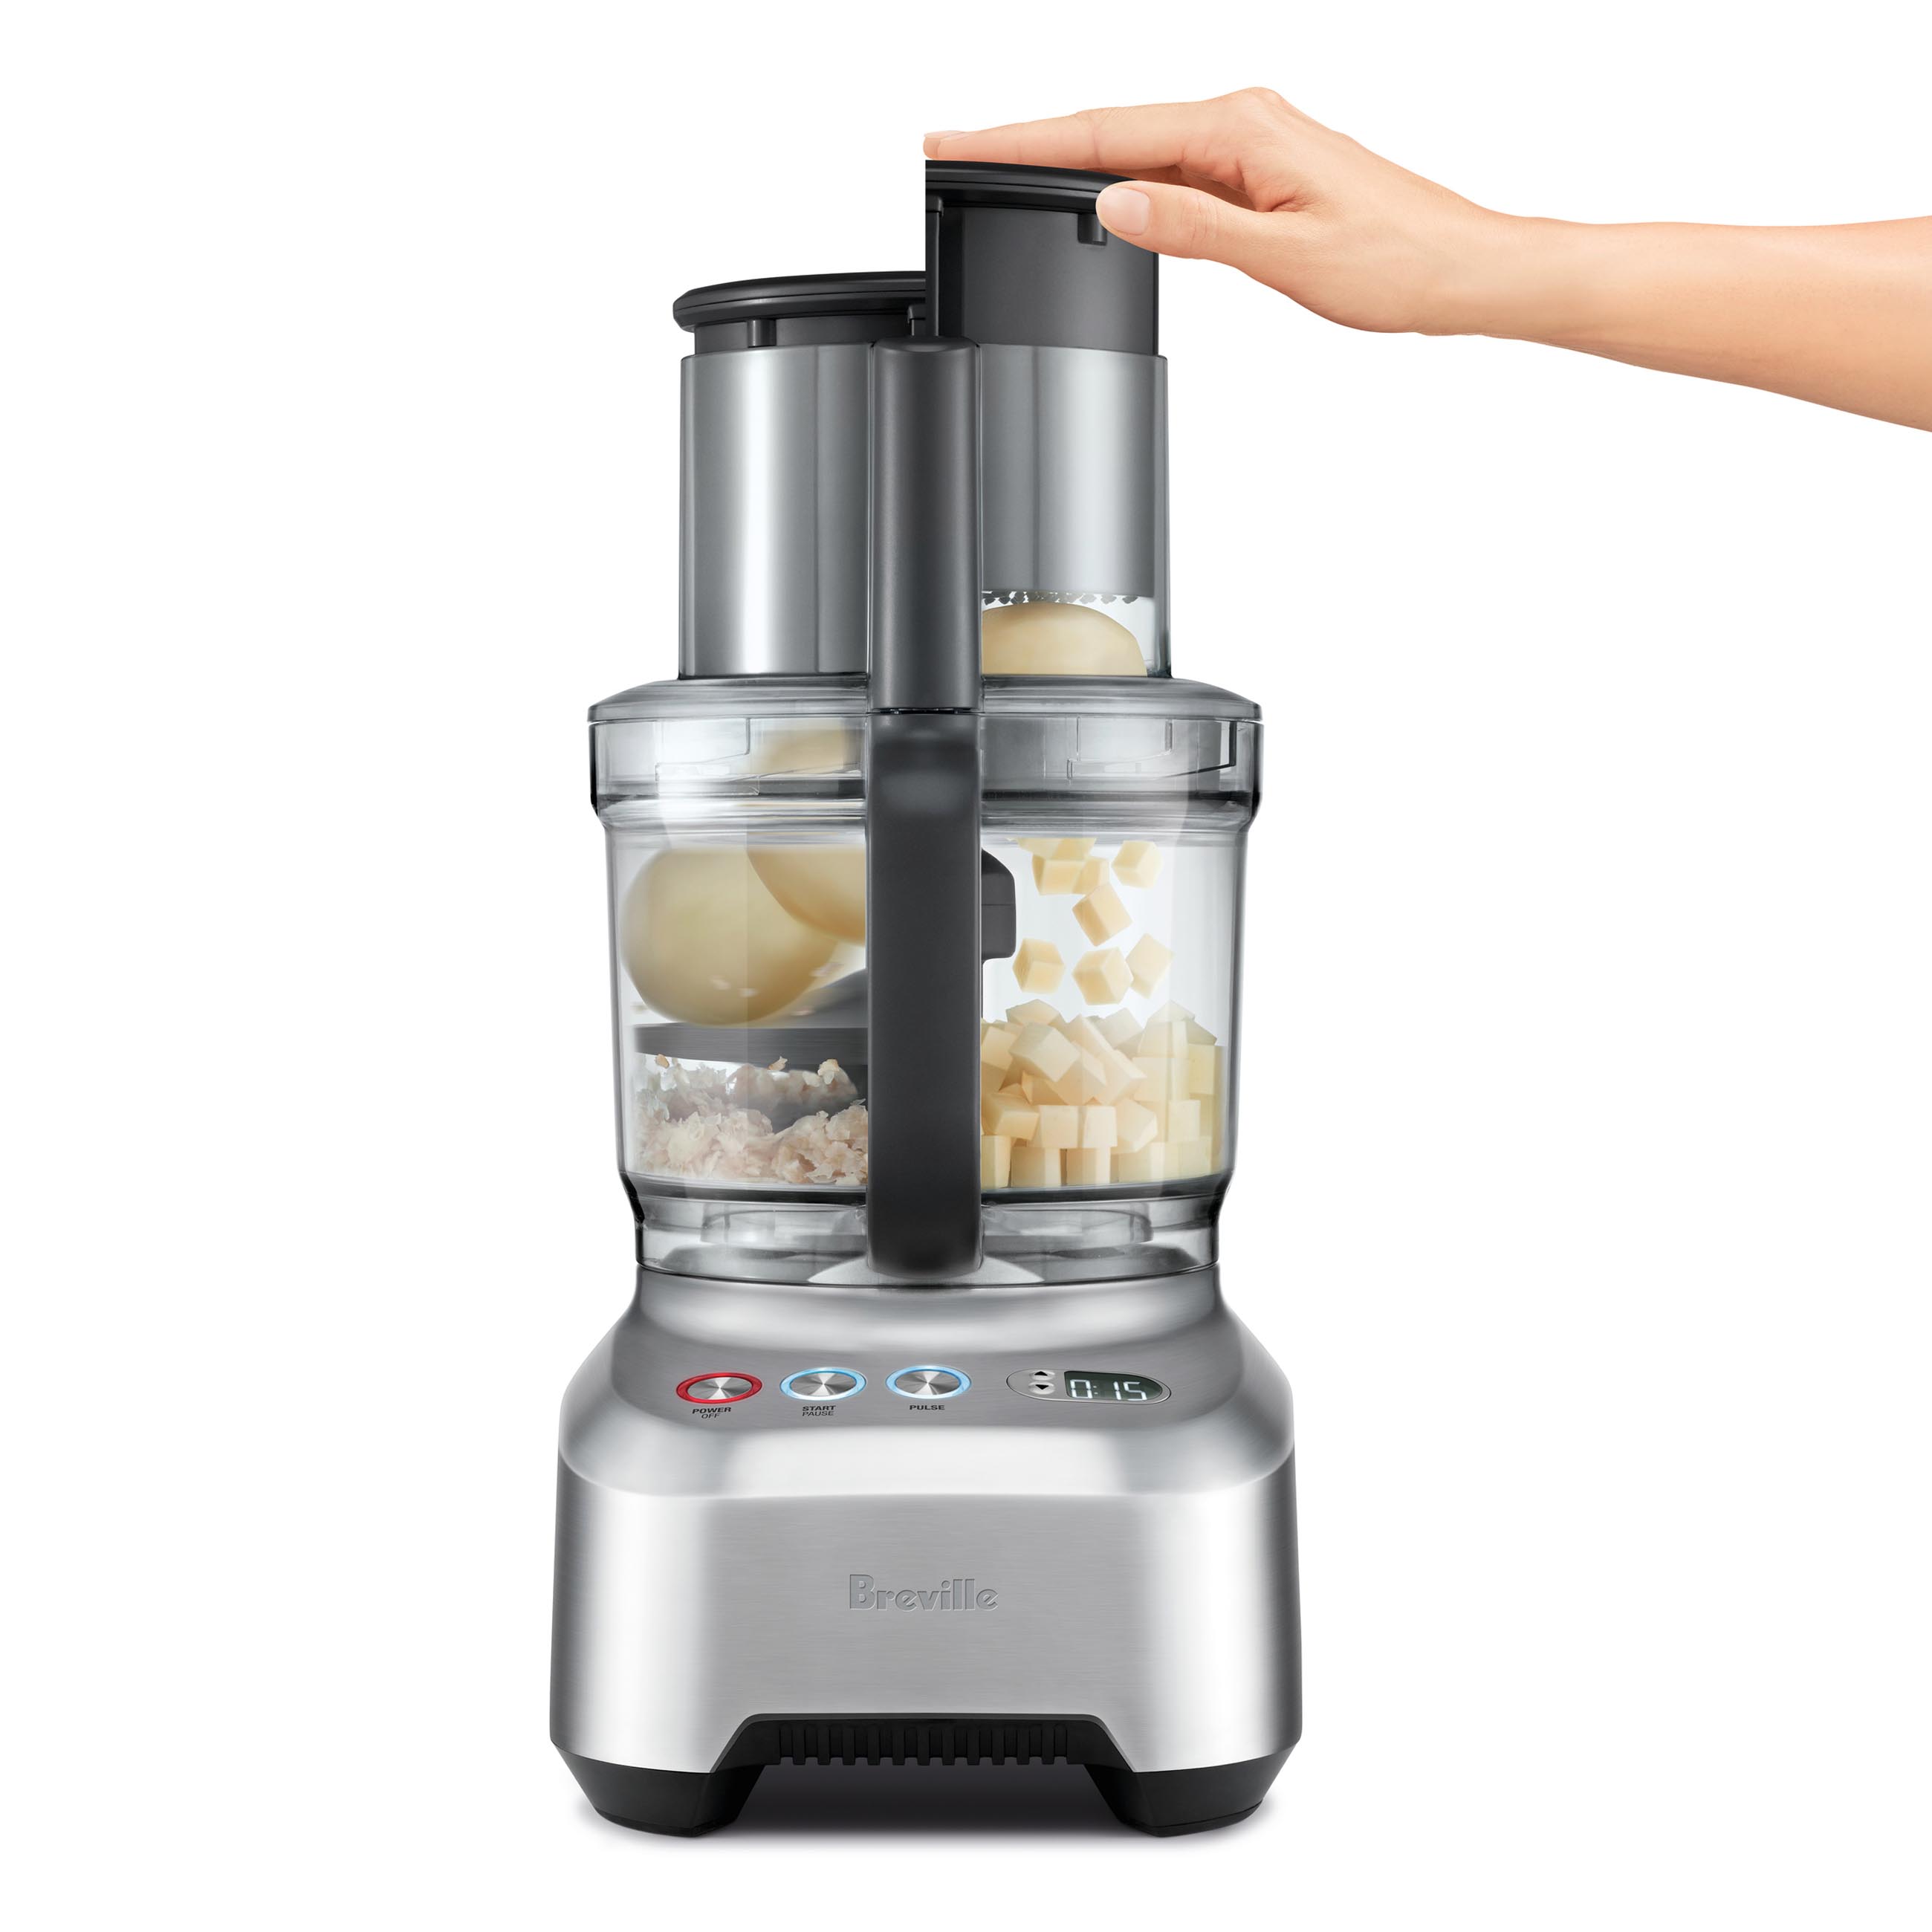 the Breville Sous Chef® 16 Peel & Dice